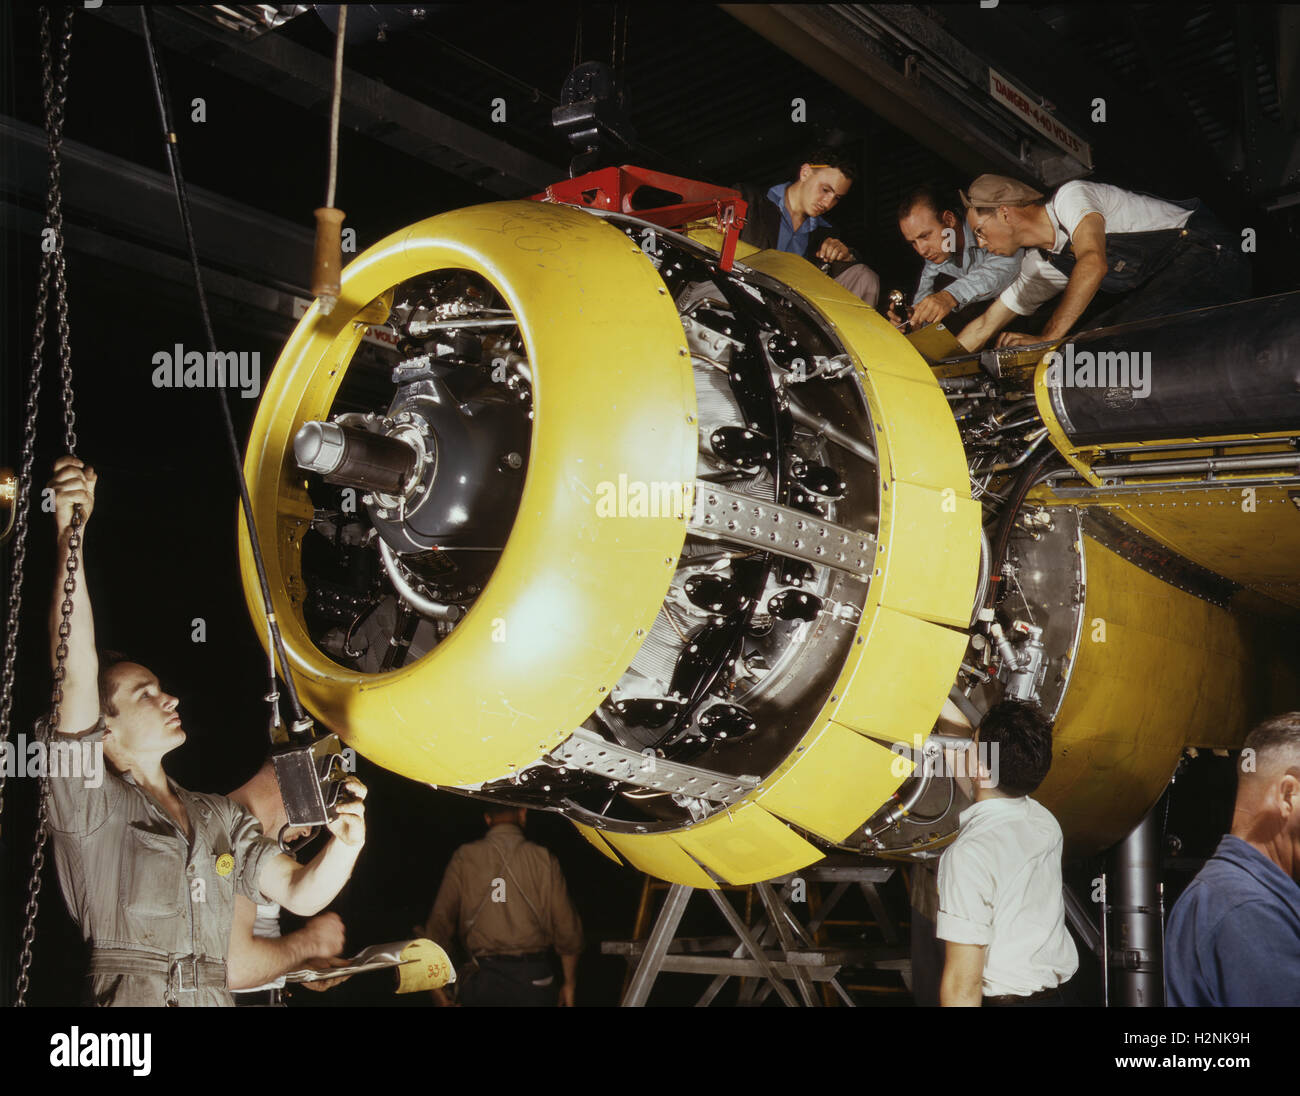 Workers Mounting Motor on Fairfax B-25 Bomber, North American Aviation Plant, Inglewood, California, USA, Alfred T. Palmer, U.S. Office of War Information, 1942 Stock Photo